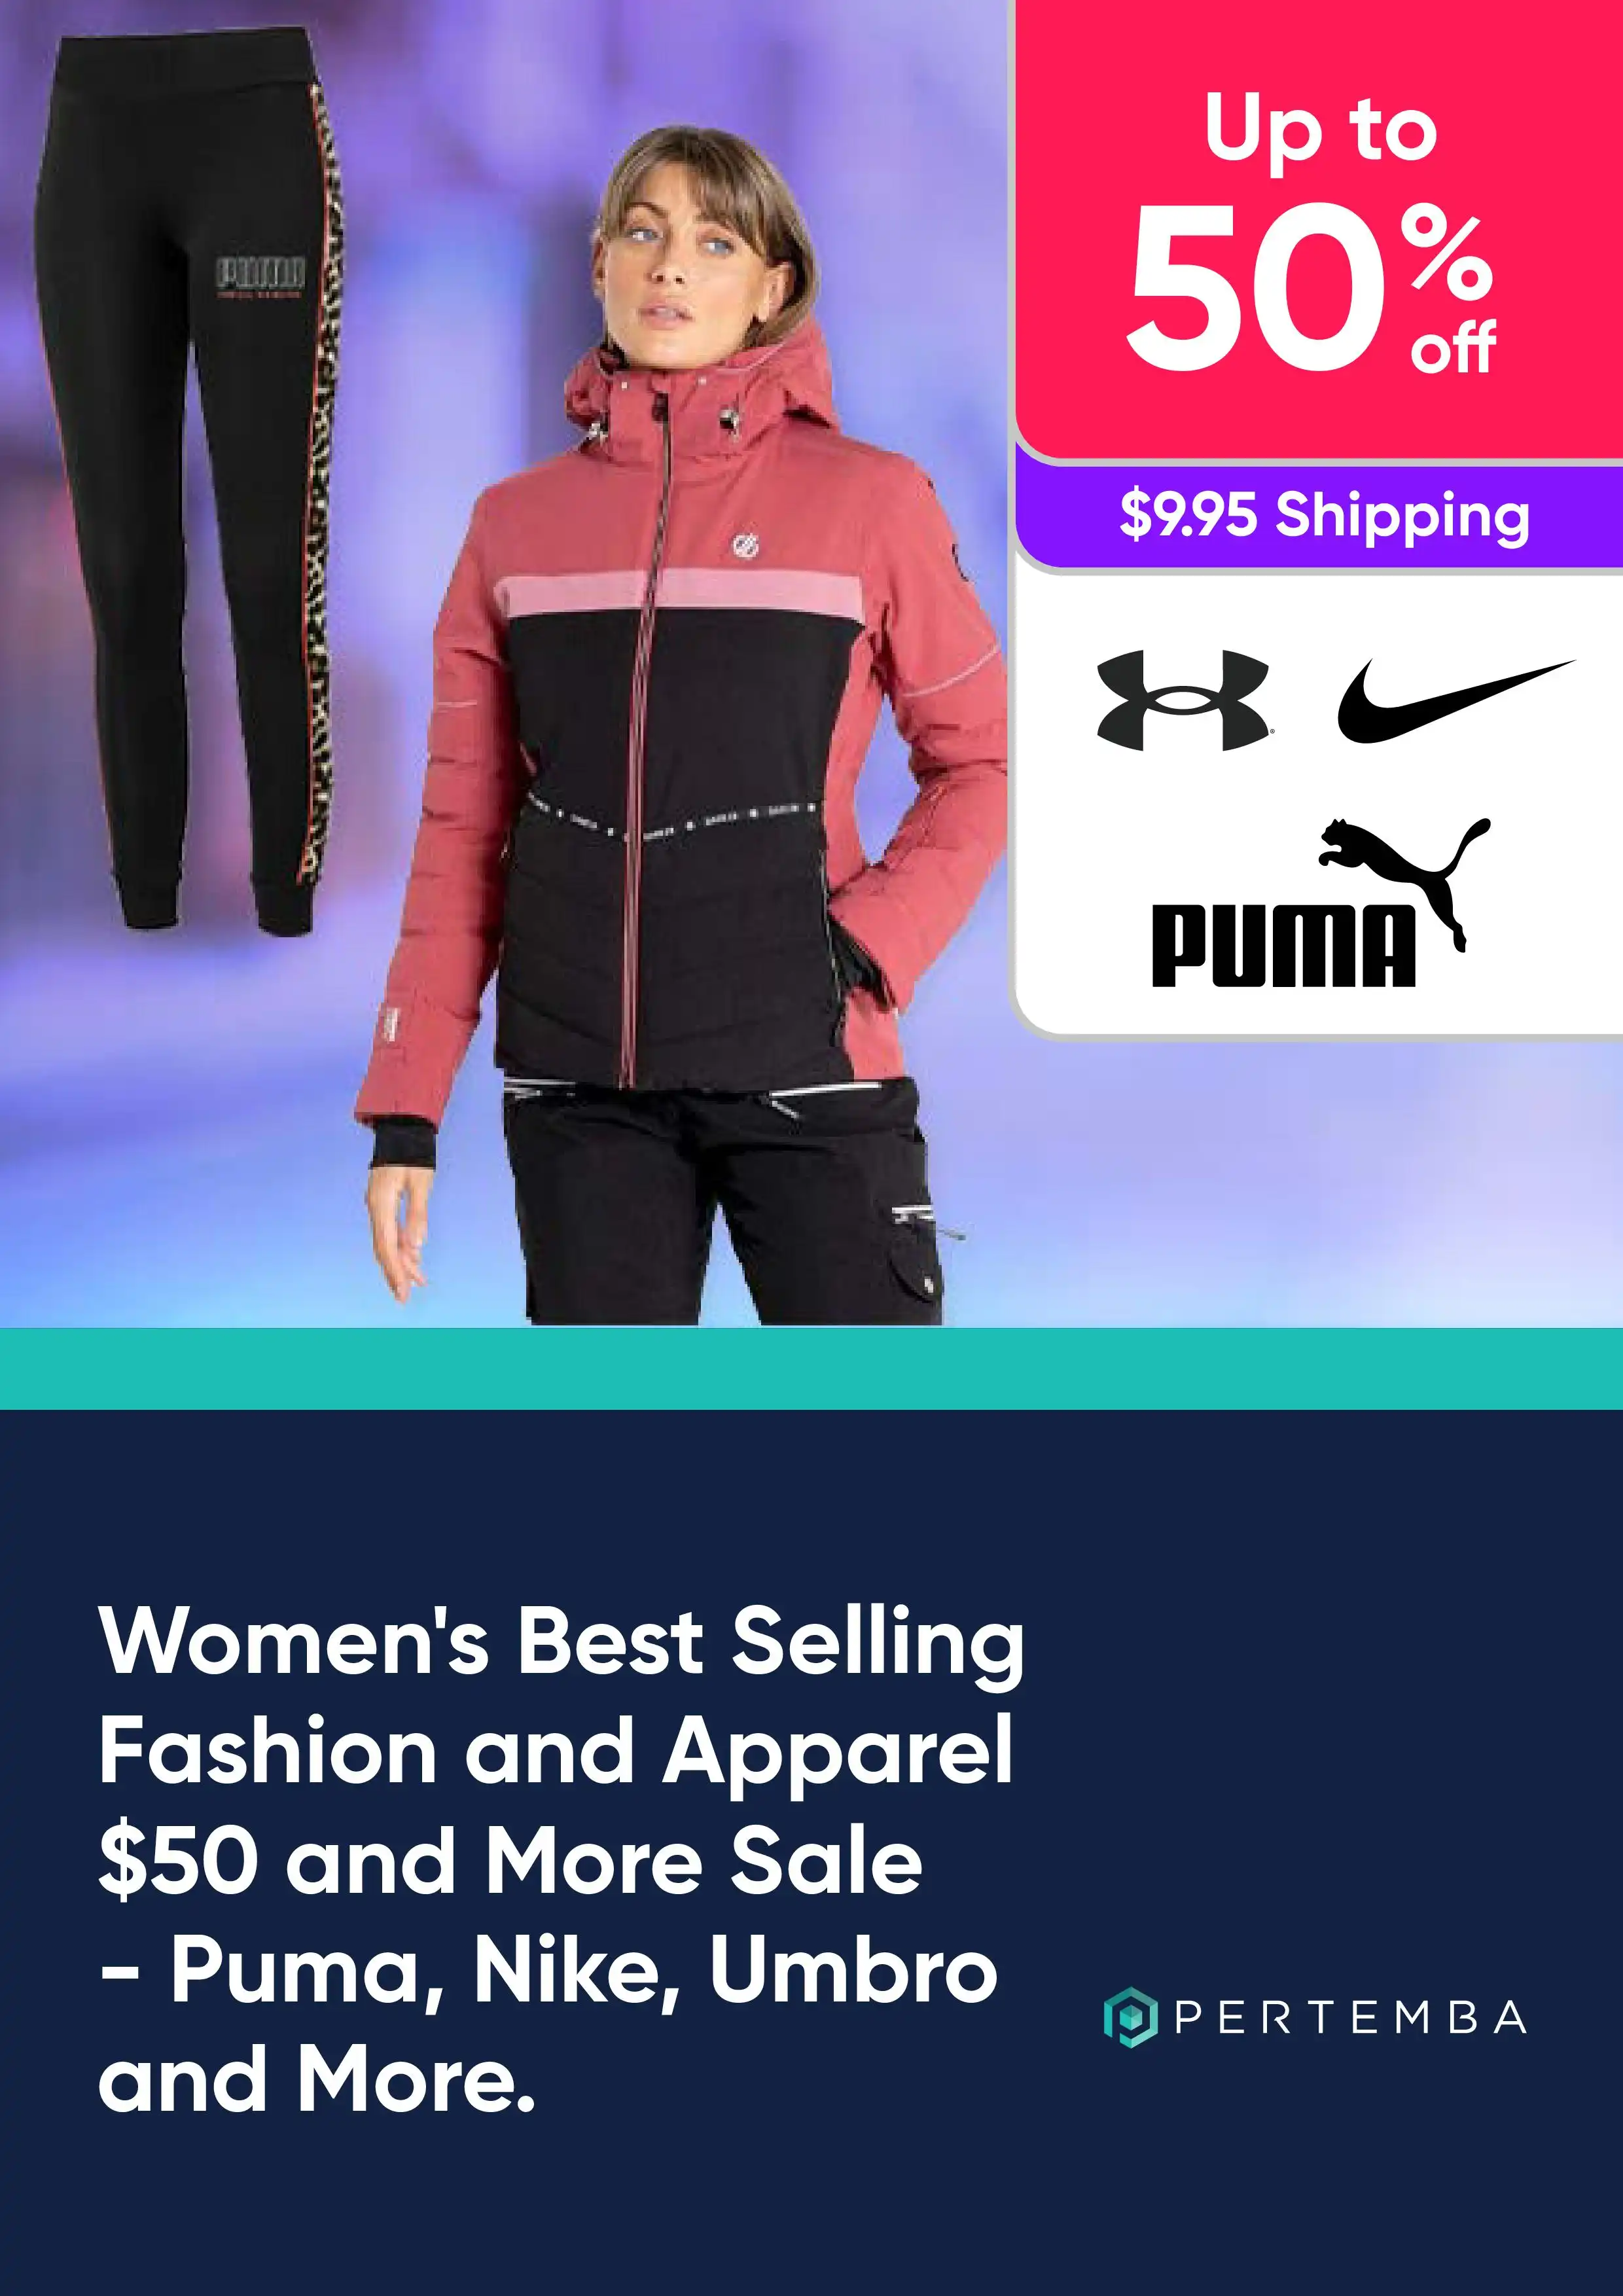 Women’s Best Selling Fashion and Apparel $50 and More Sale - Up to 60% Off